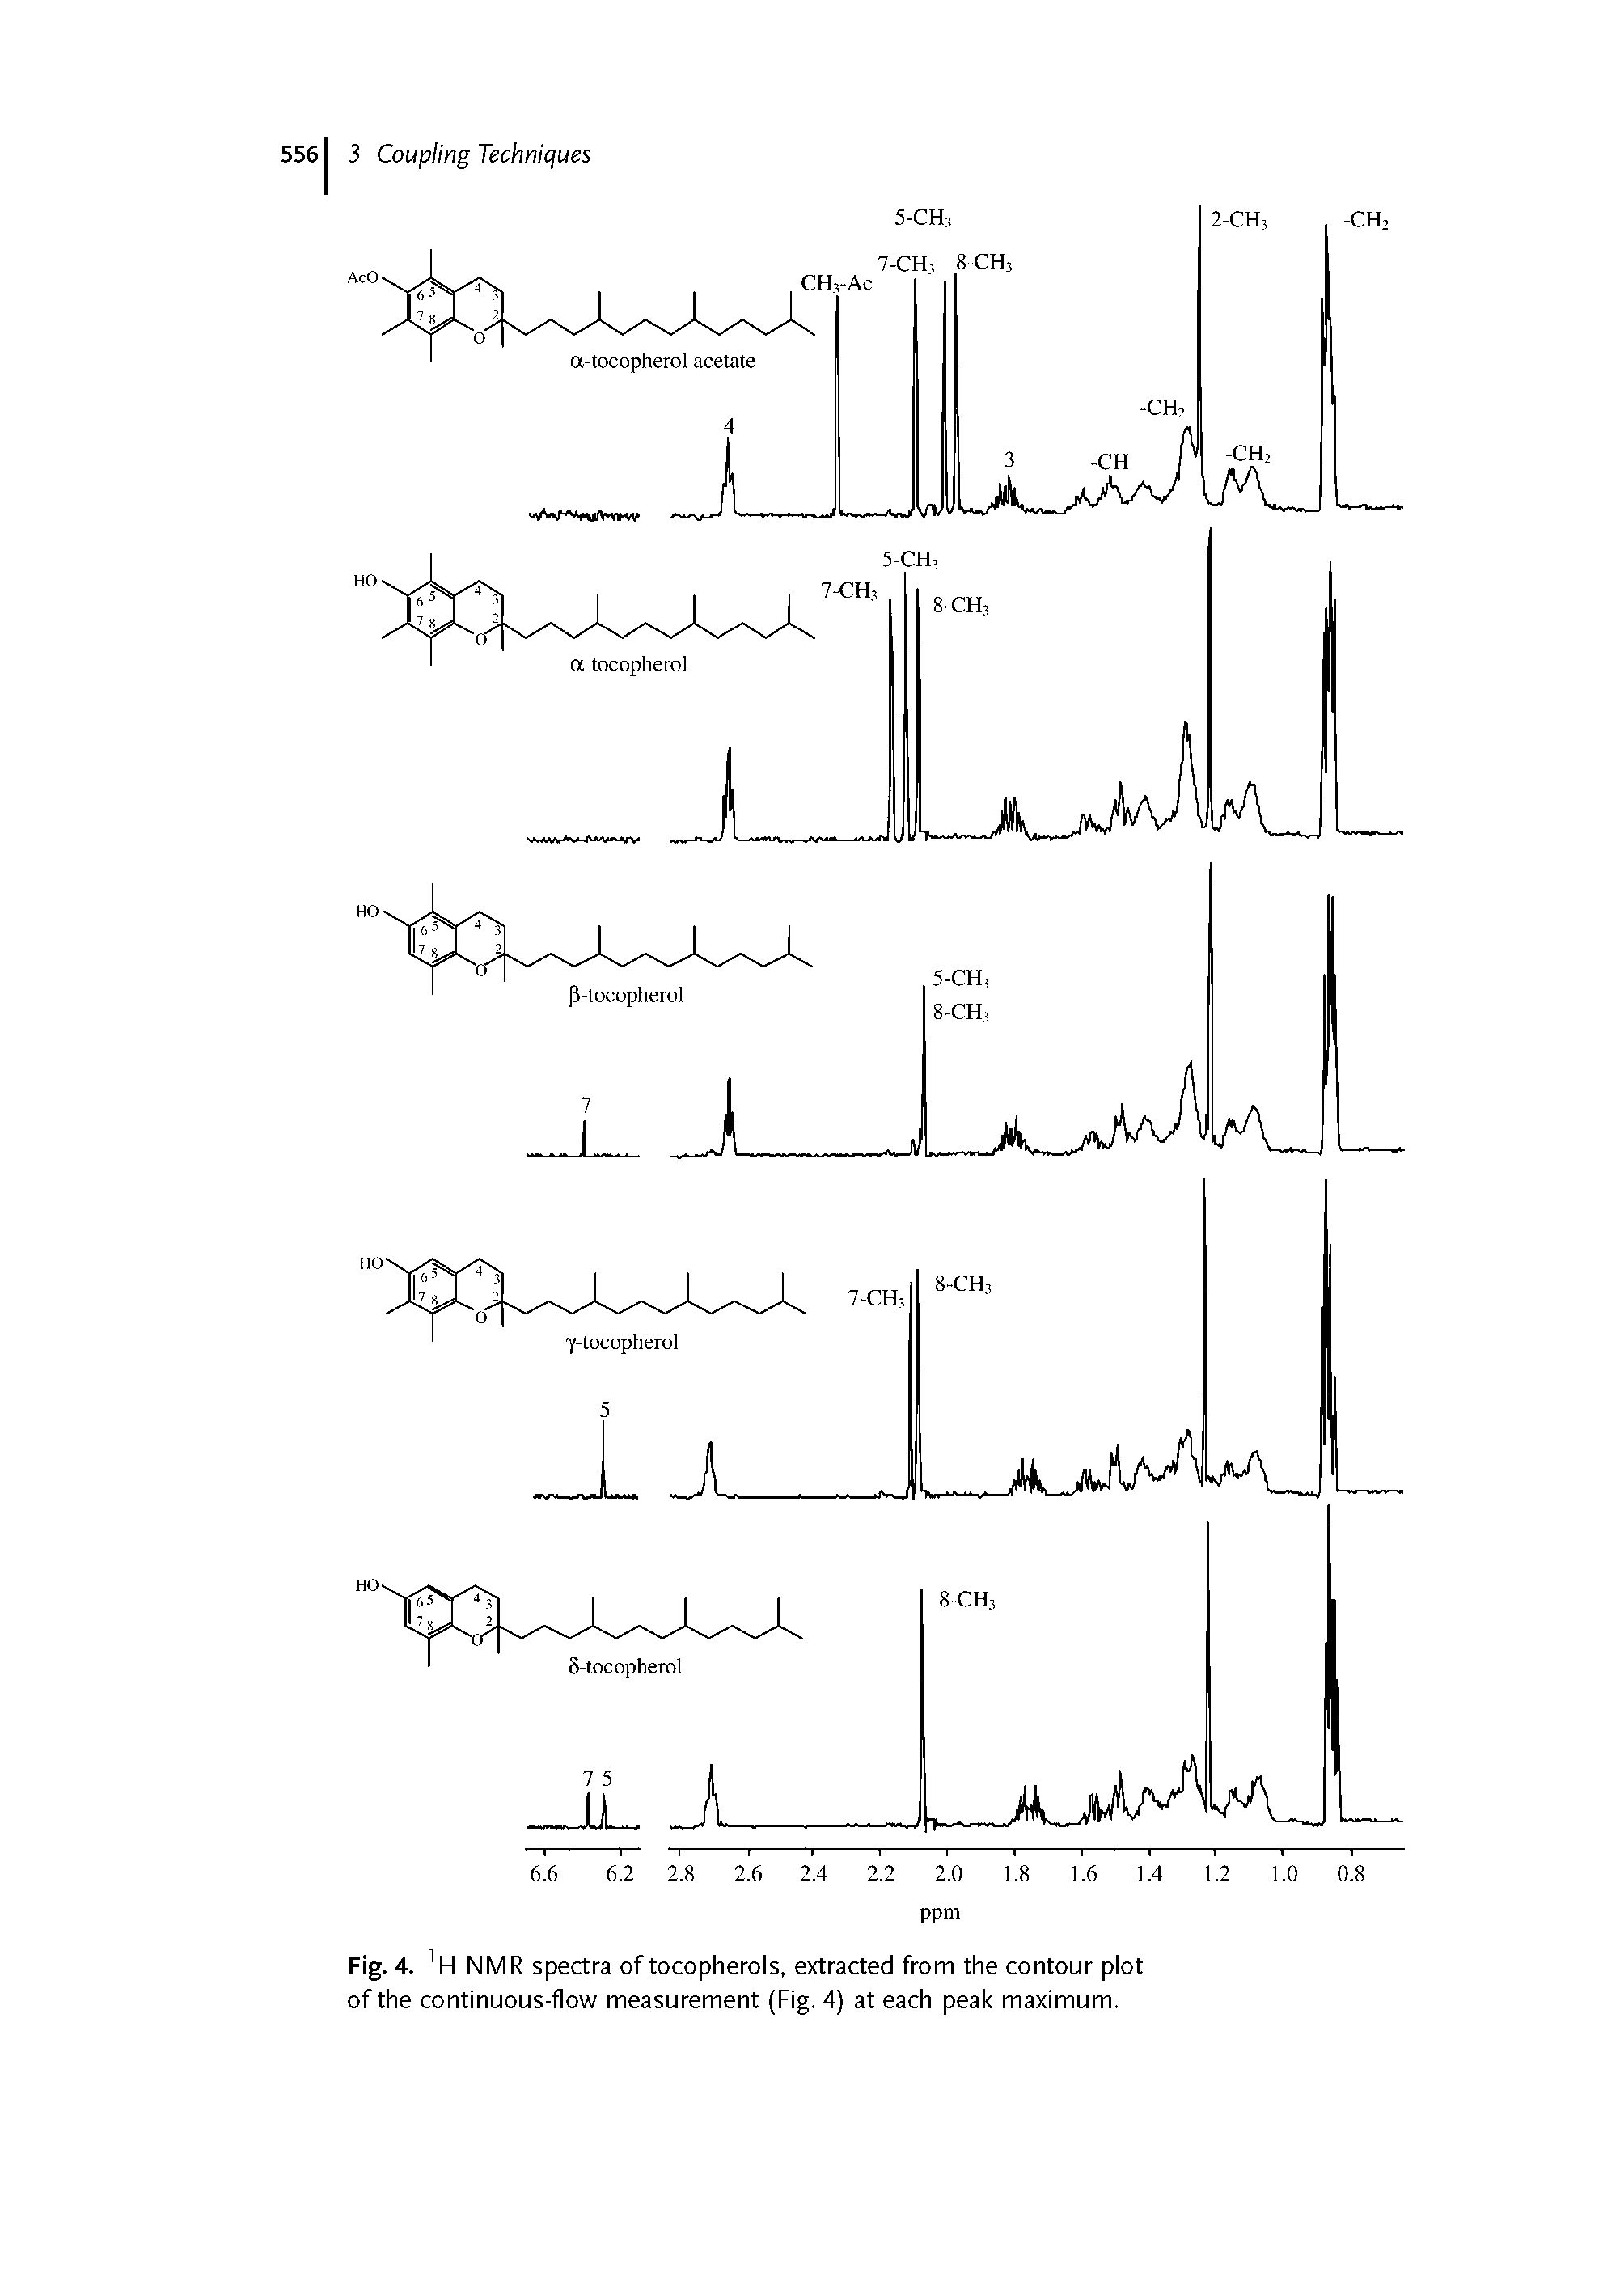 Fig. 4. H NMR spectra of tocopherols, extracted from the contour plot of the continuous-flow measurement (Fig. 4) at each peak maximum.